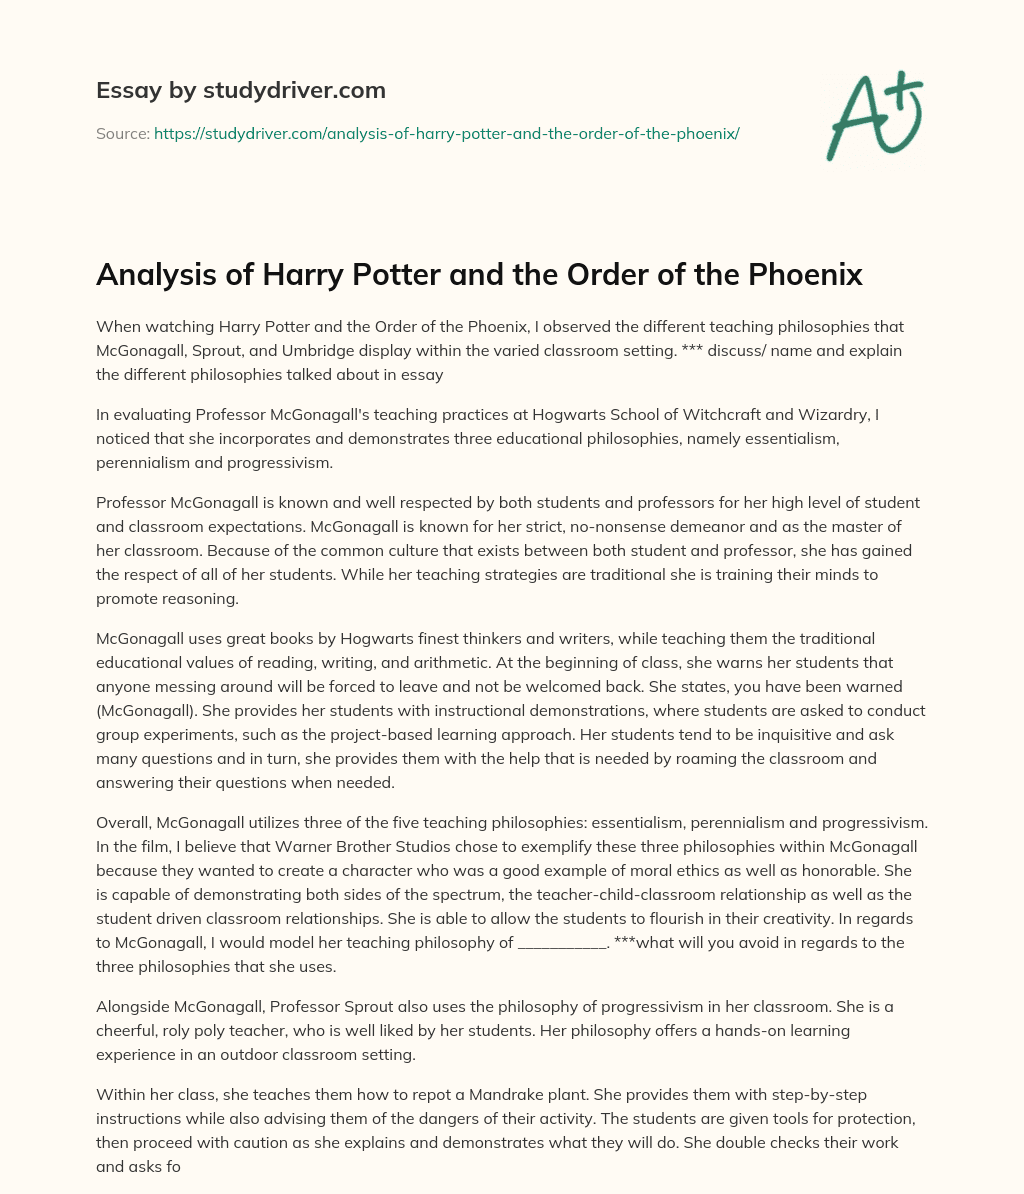 Analysis of Harry Potter and the Order of the Phoenix essay